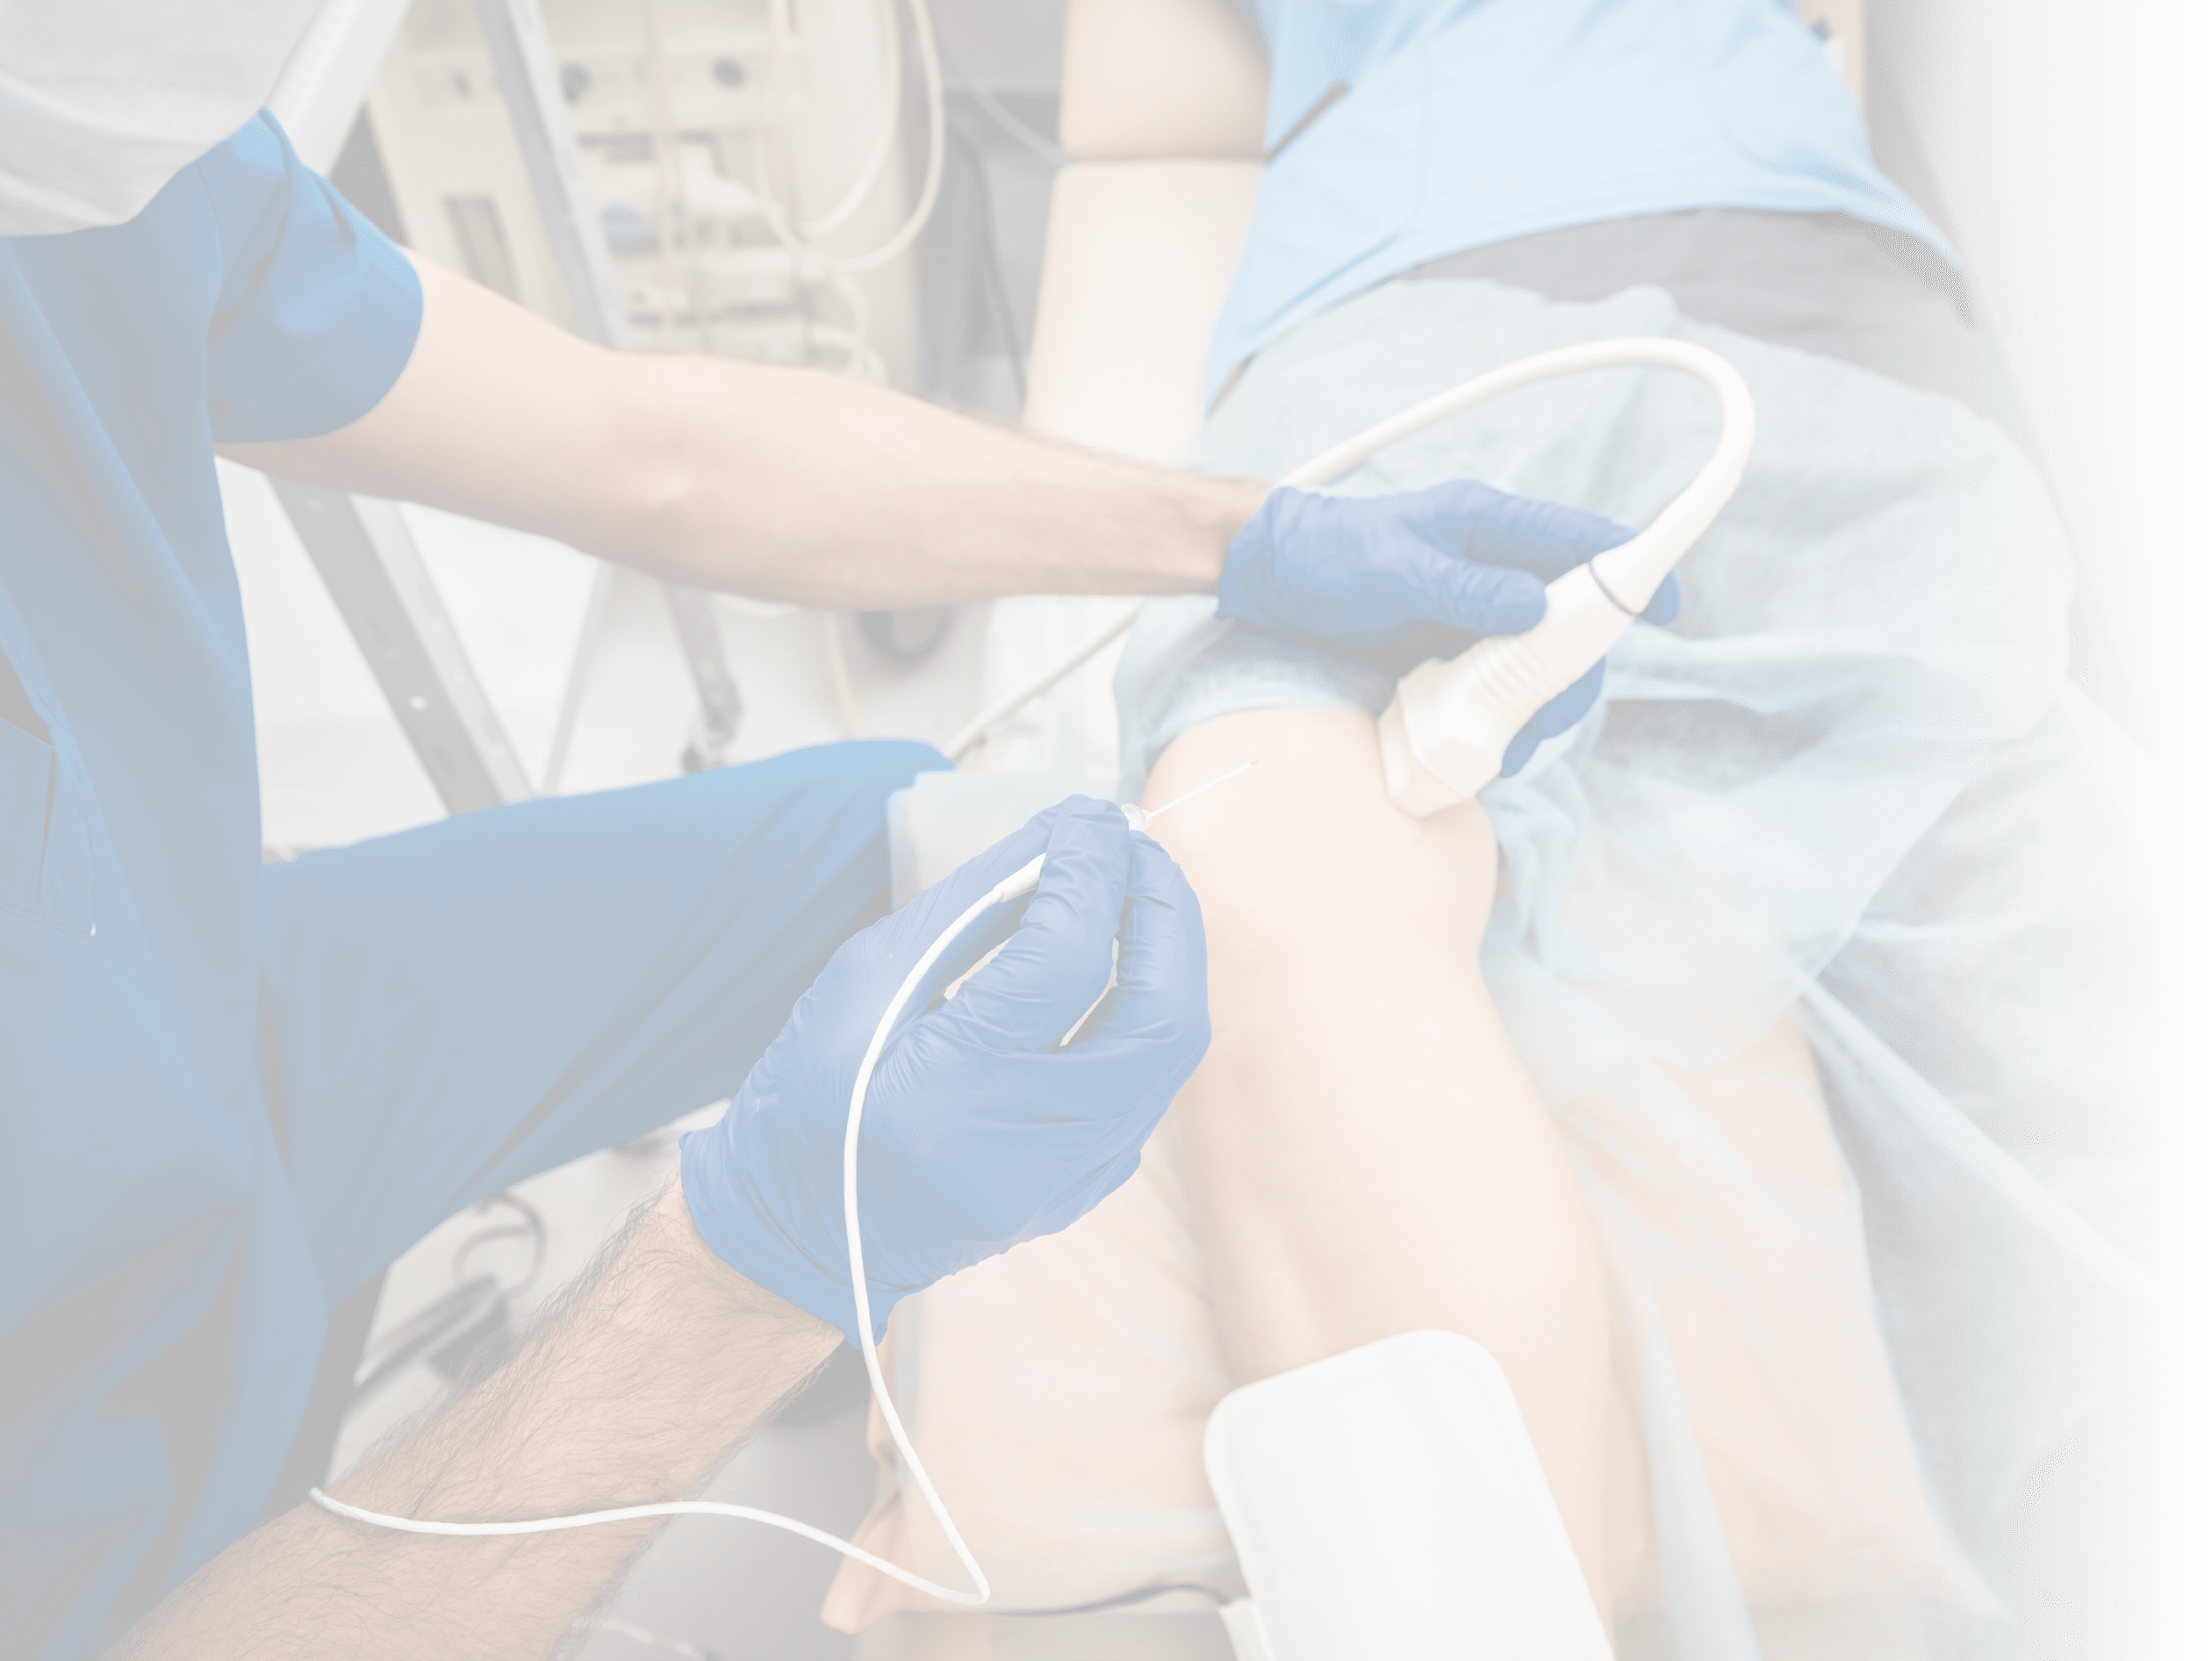 Cardiologist use tubes and ultrasound for radiofrequency catheter ablation